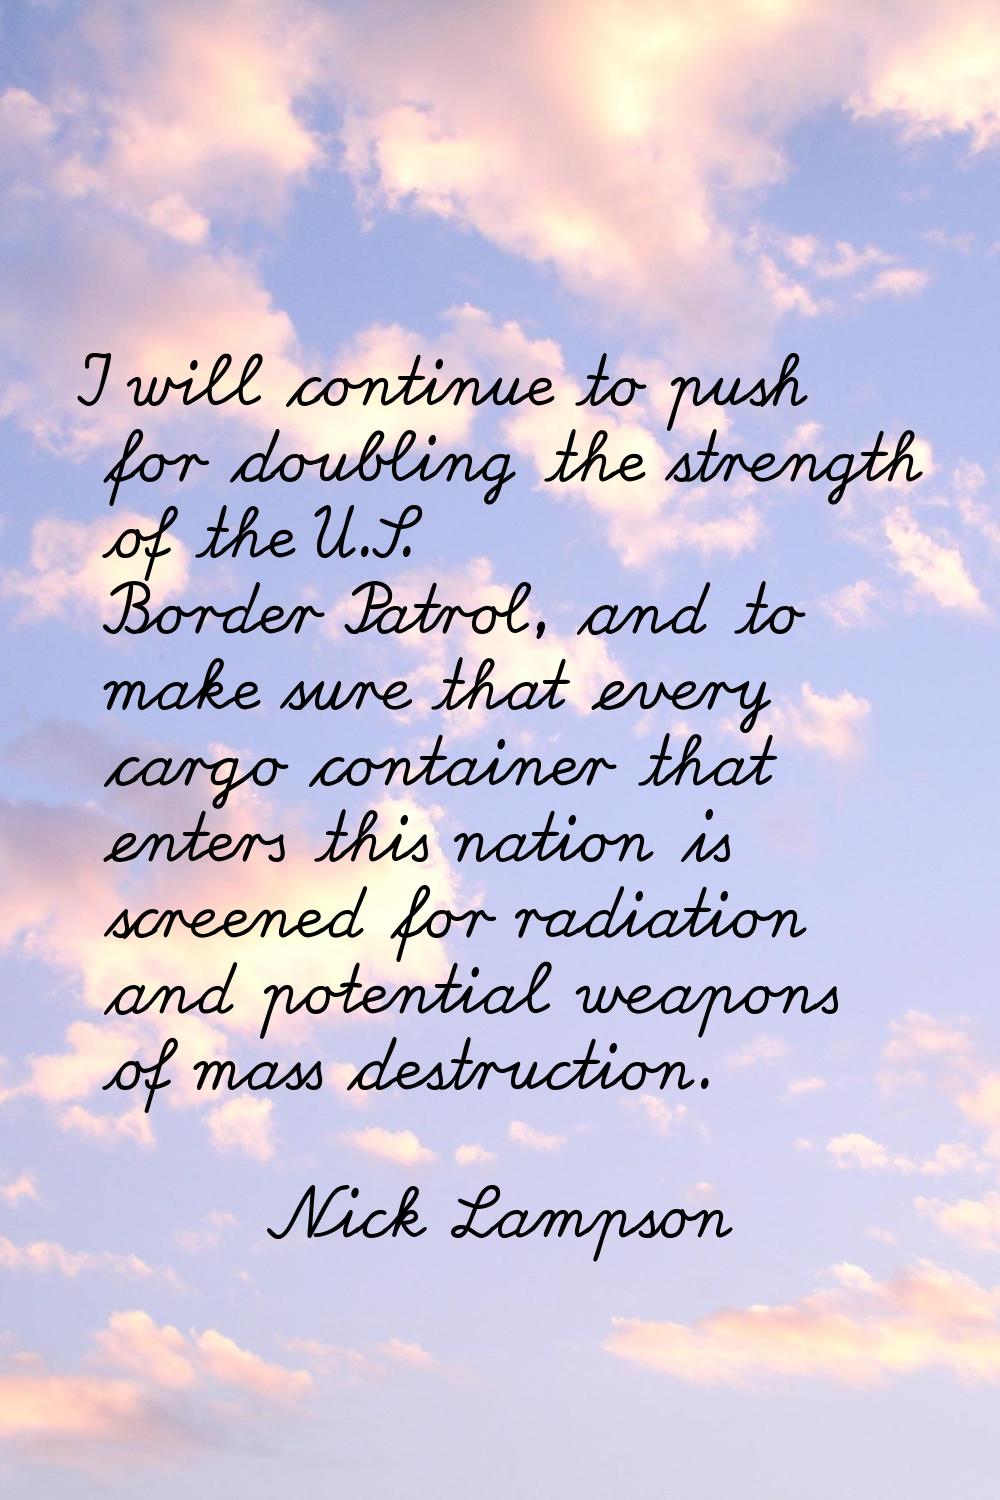 I will continue to push for doubling the strength of the U.S. Border Patrol, and to make sure that 